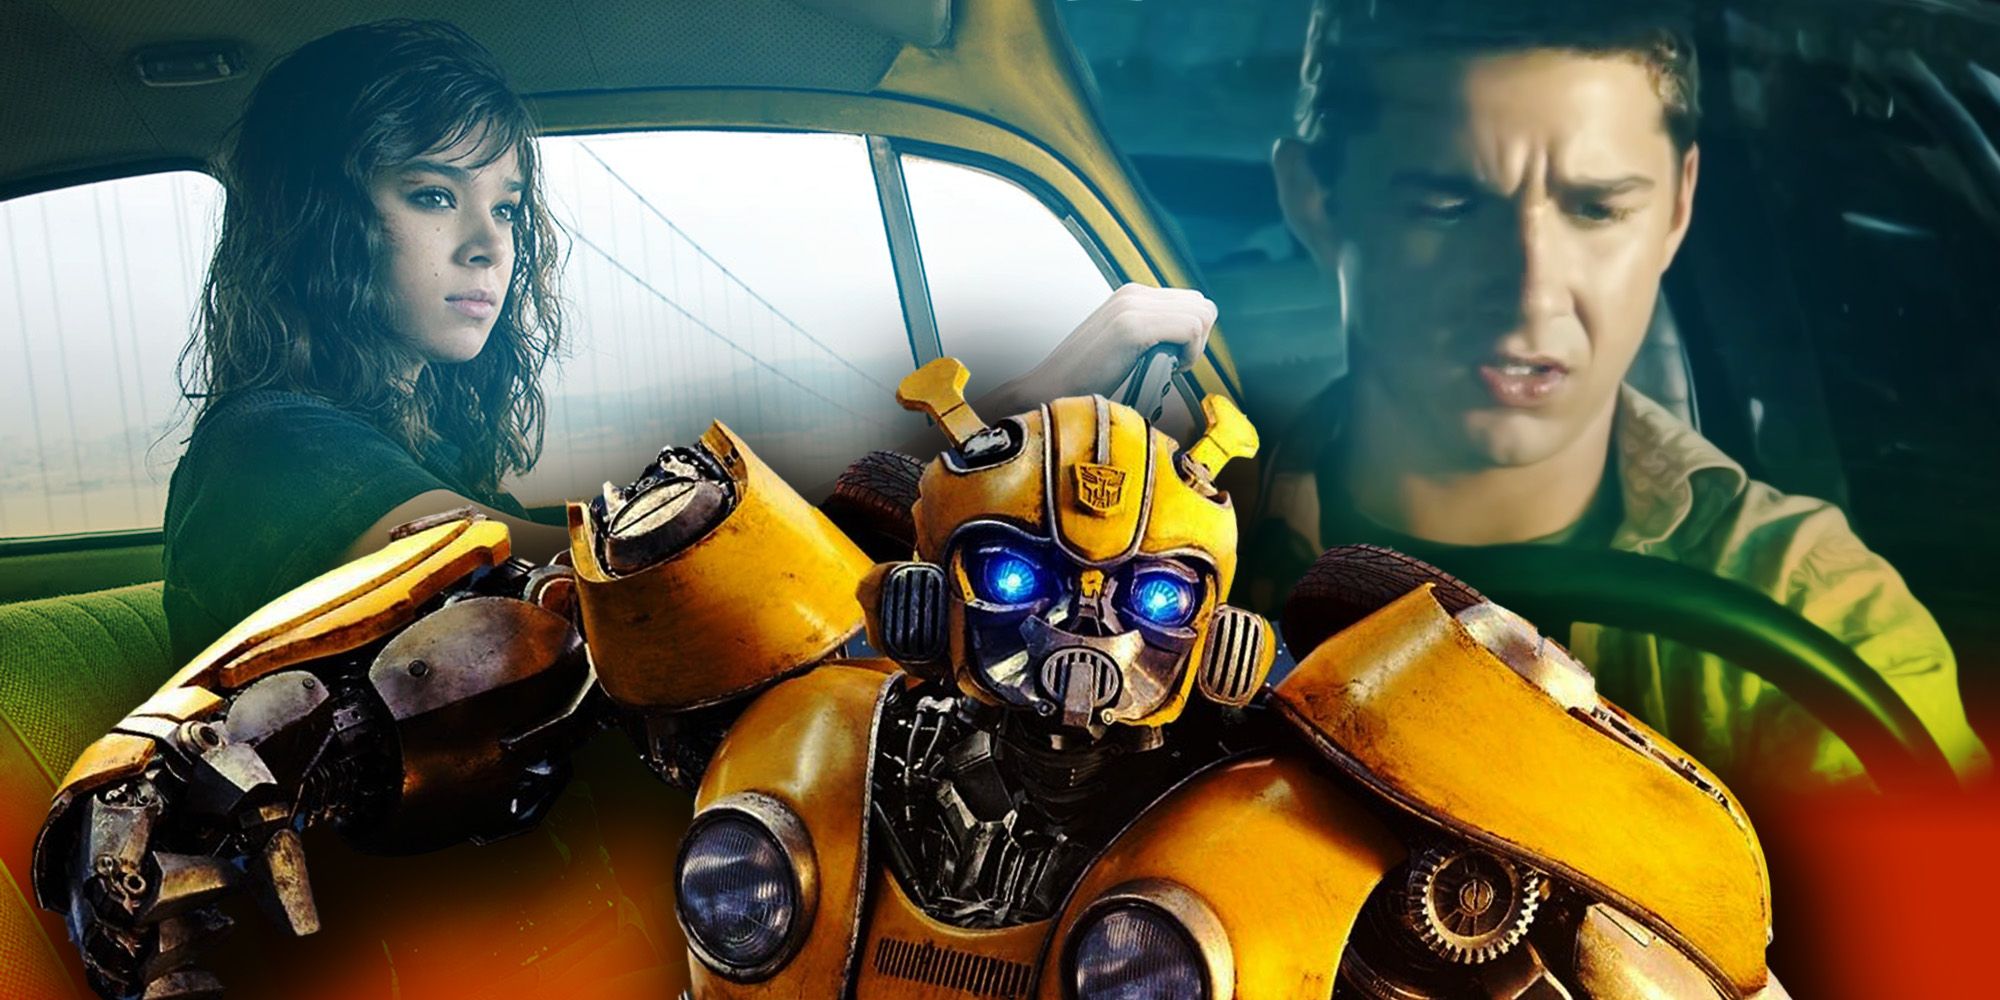 7 Transformers Characters Who Have Driven Bumblebee In The Movies